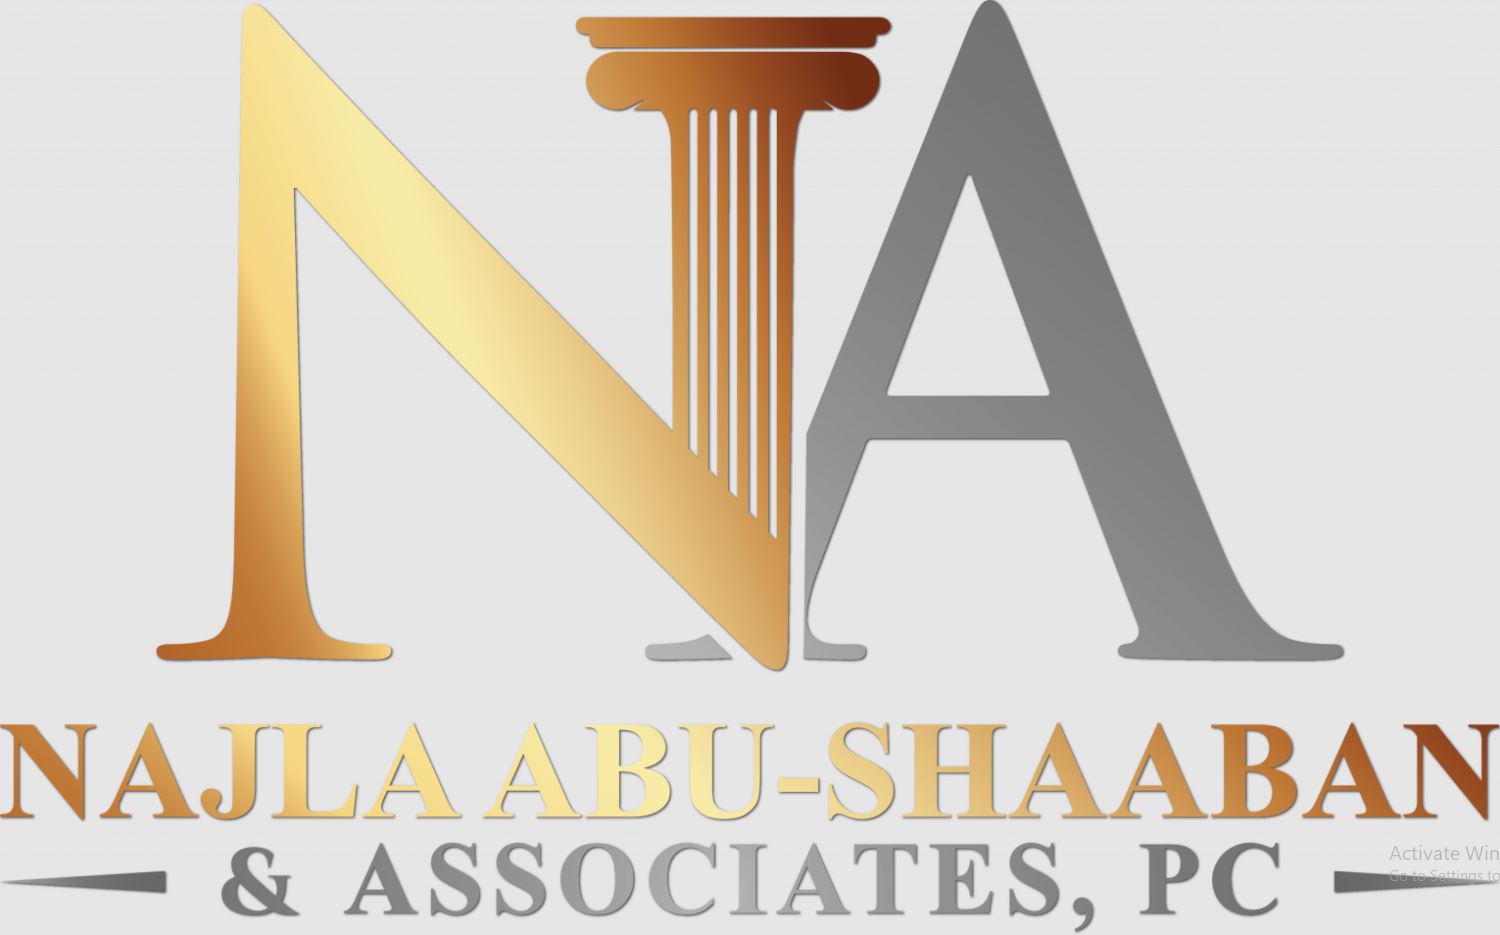 Abu-Shaaban Immigration Law P.C. Profile Picture